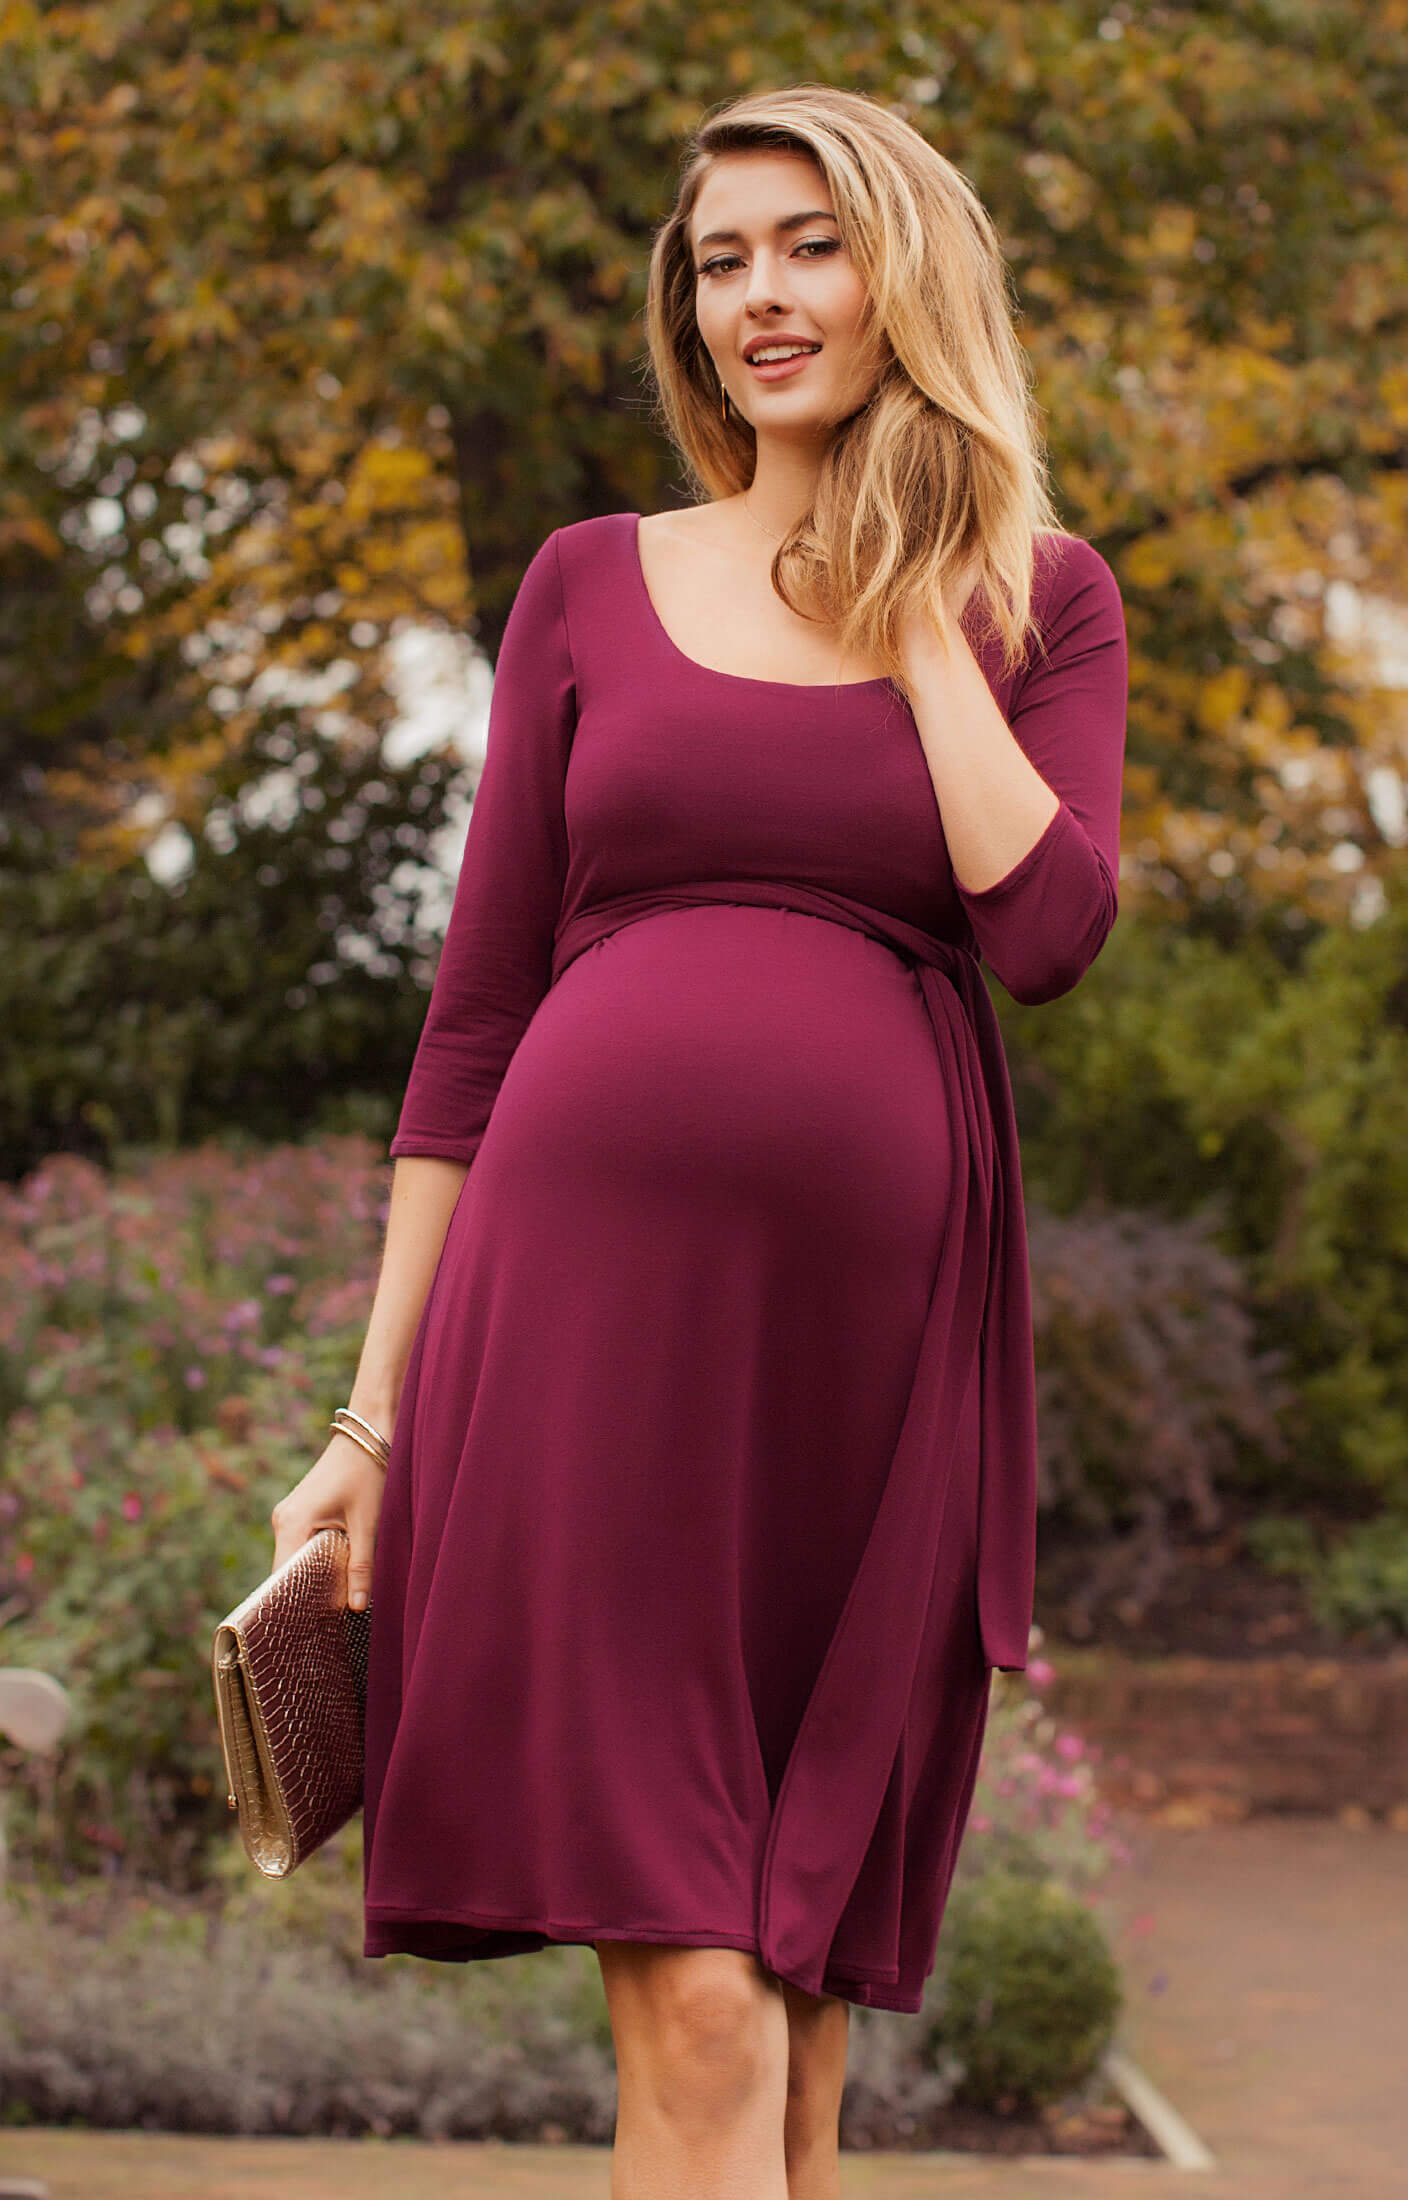 Back Support for Pregnant Women: Built-In Support - Mumberry